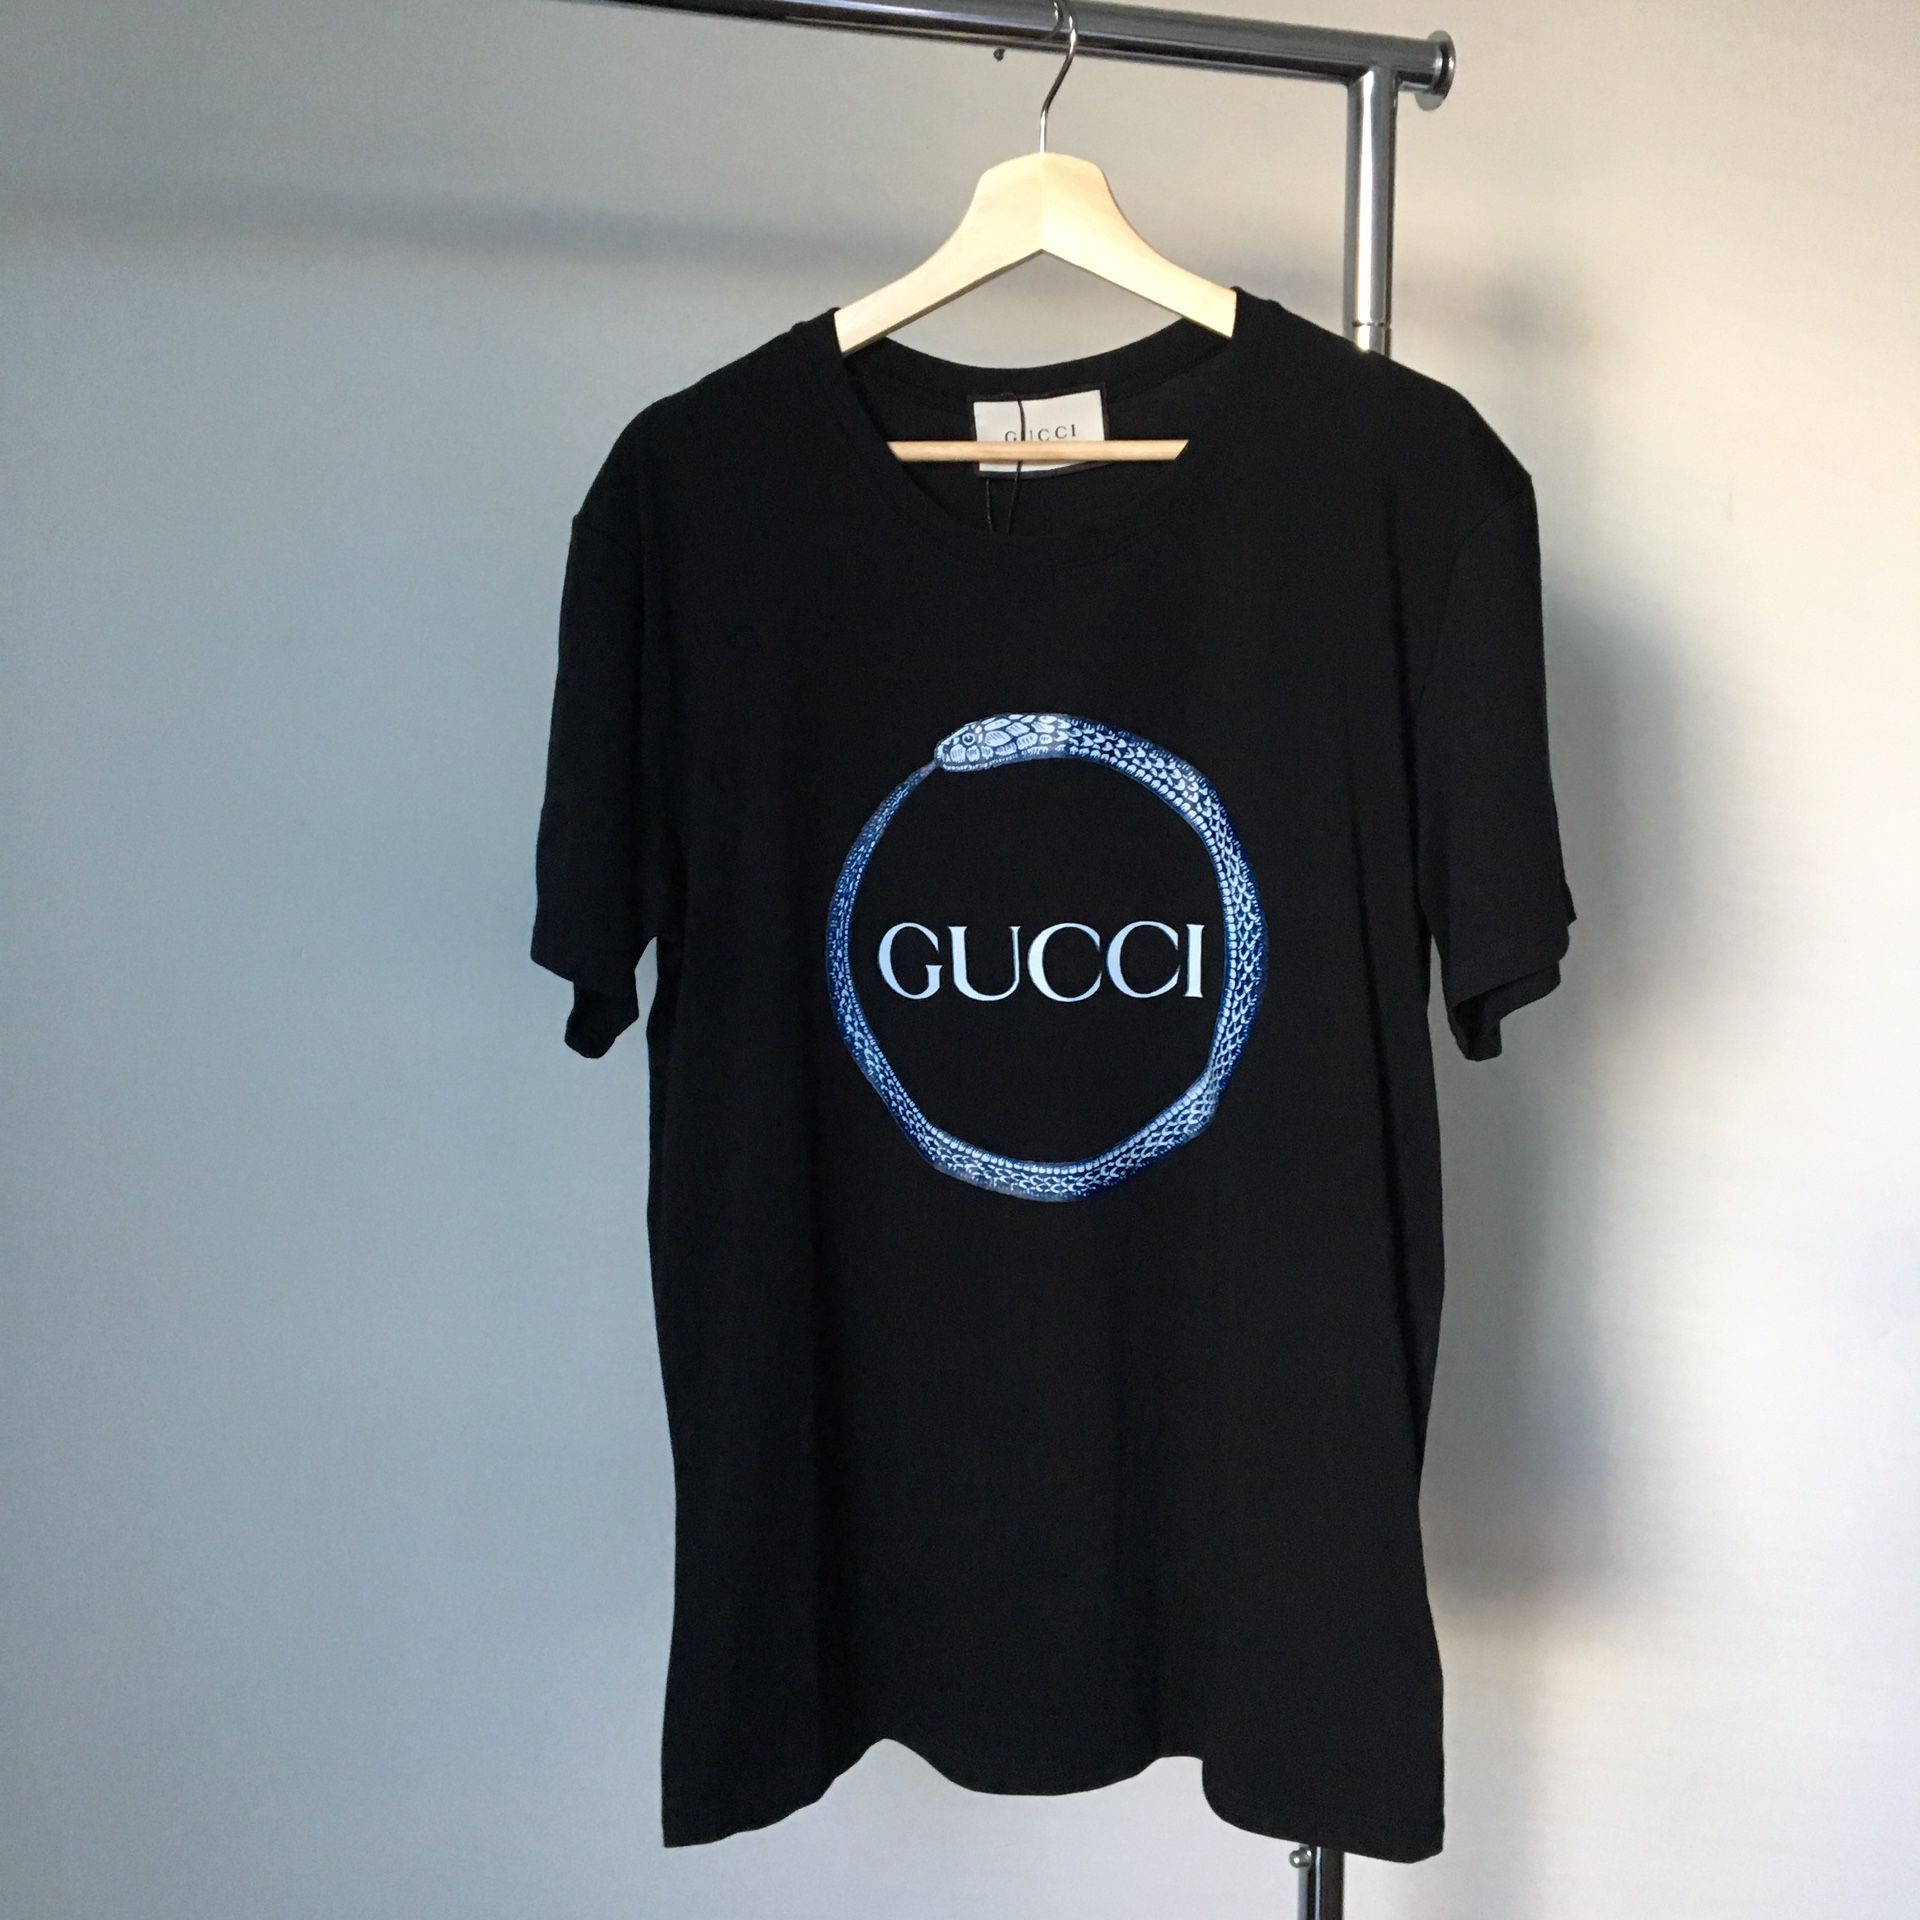 Gucci Snake Ring T-Shirt Sale in Los Angeles, CA - OfferUp